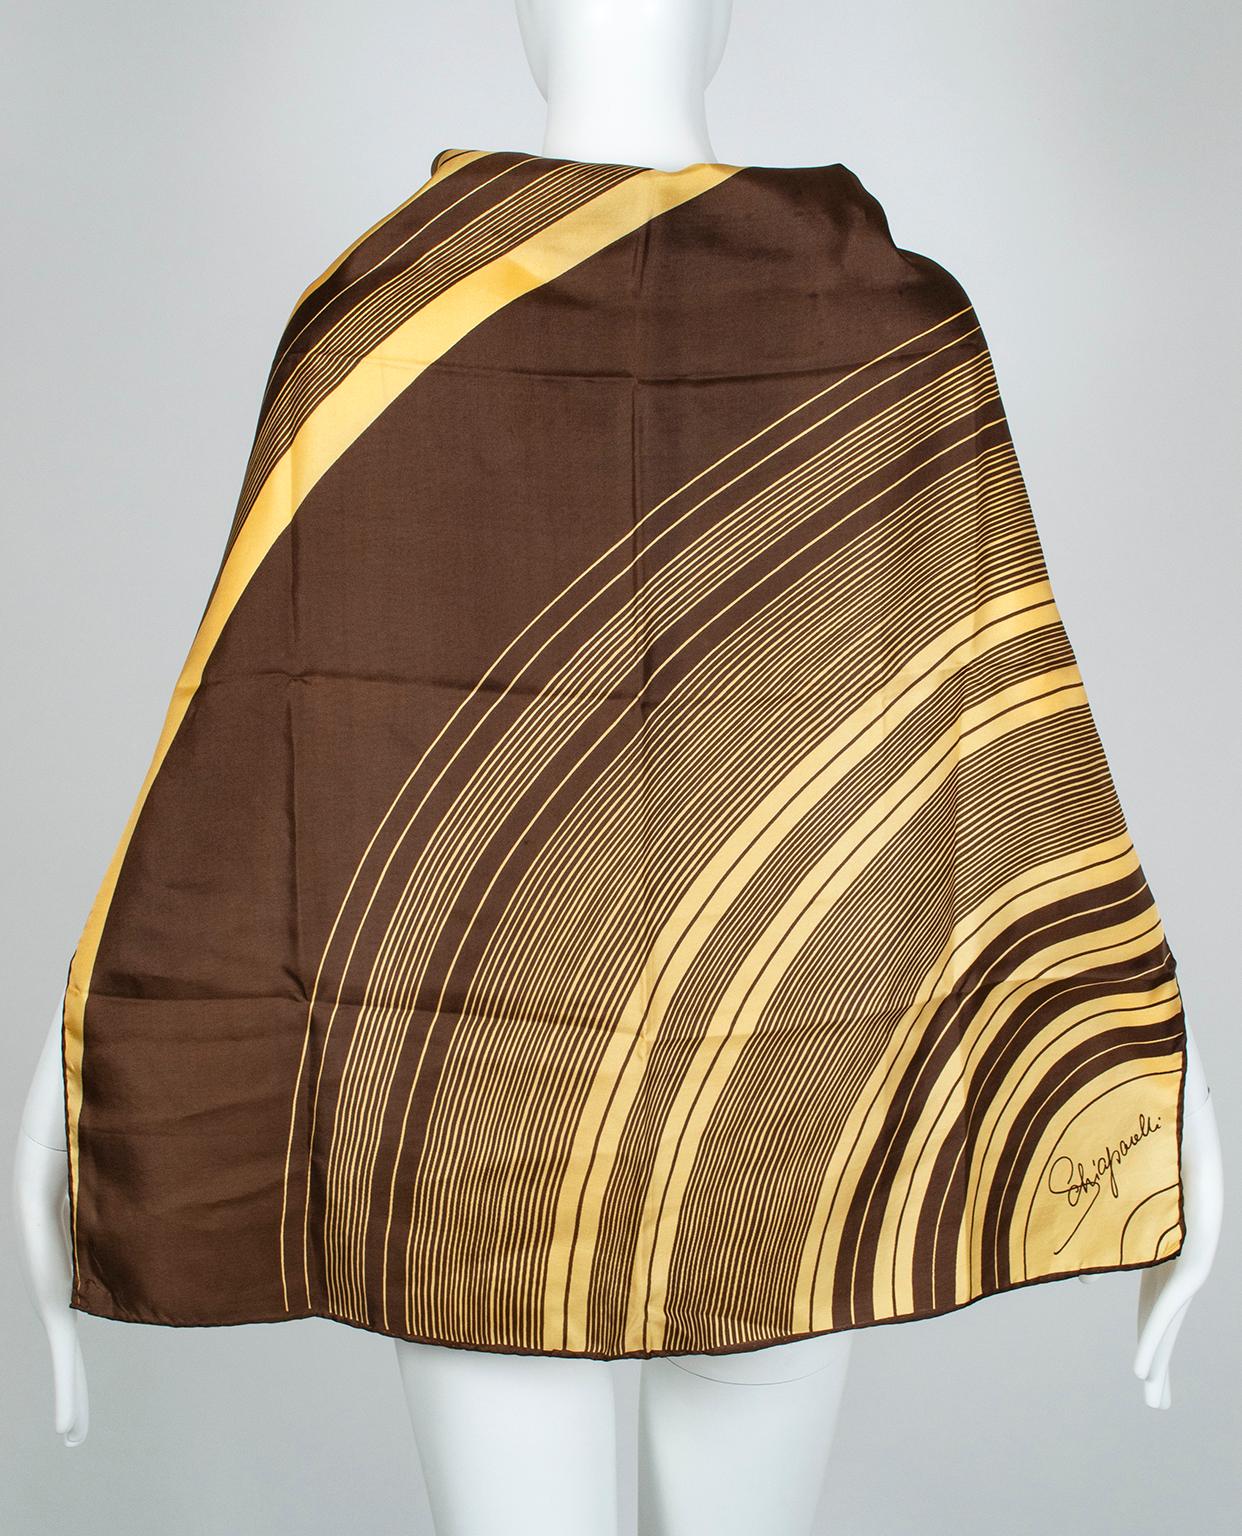 Elsa Schiaparelli's penchant for the unusual was well-documented through her association with Surrealist art. Her bent toward the study of the zodiac, however, is less well known but reflected in this scarf portraying a stylized version of Saturn's